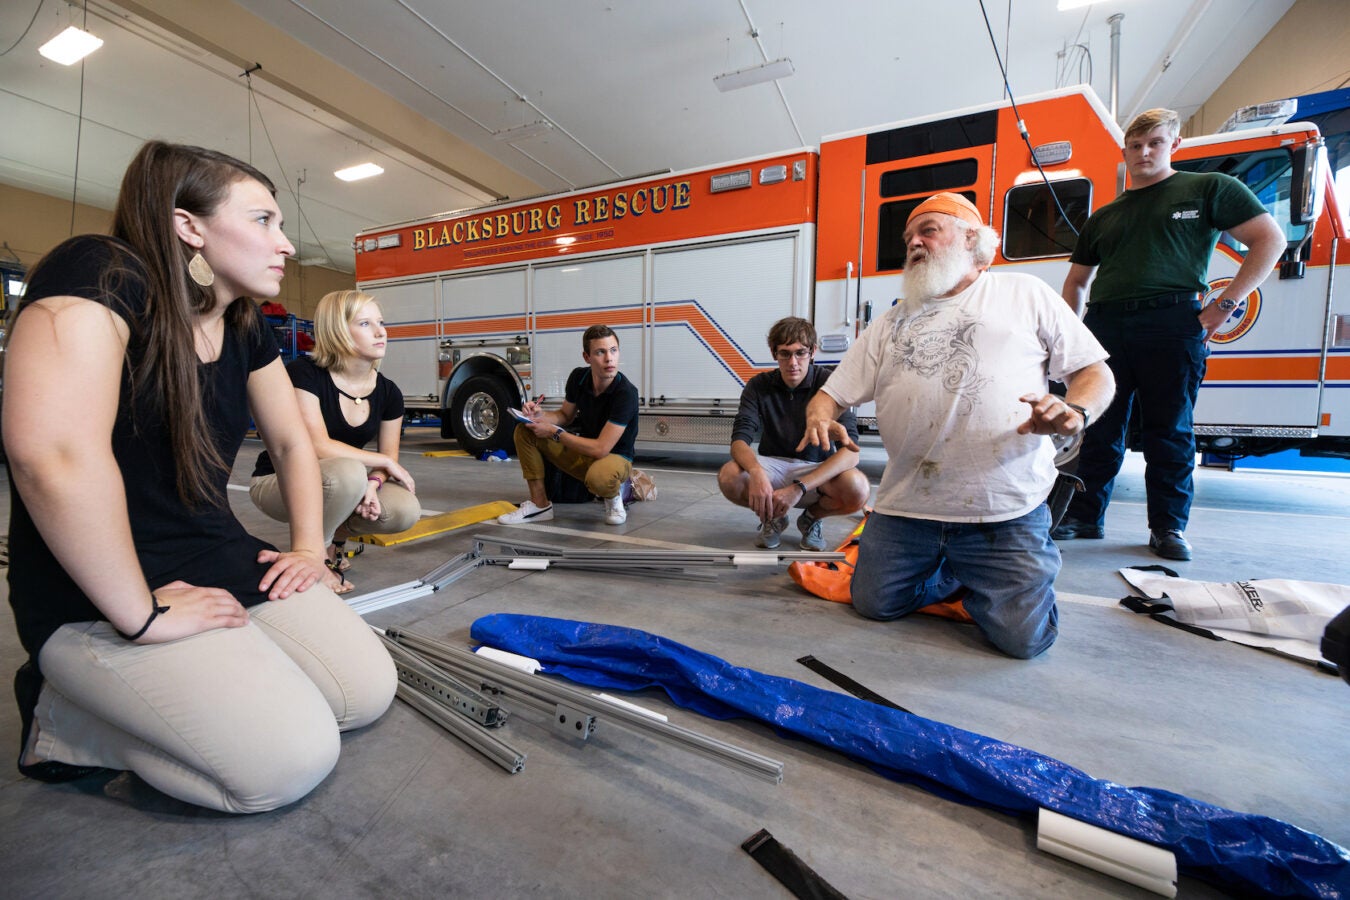 Andy and the engineering team kneeling down, showing an EMT the prototype